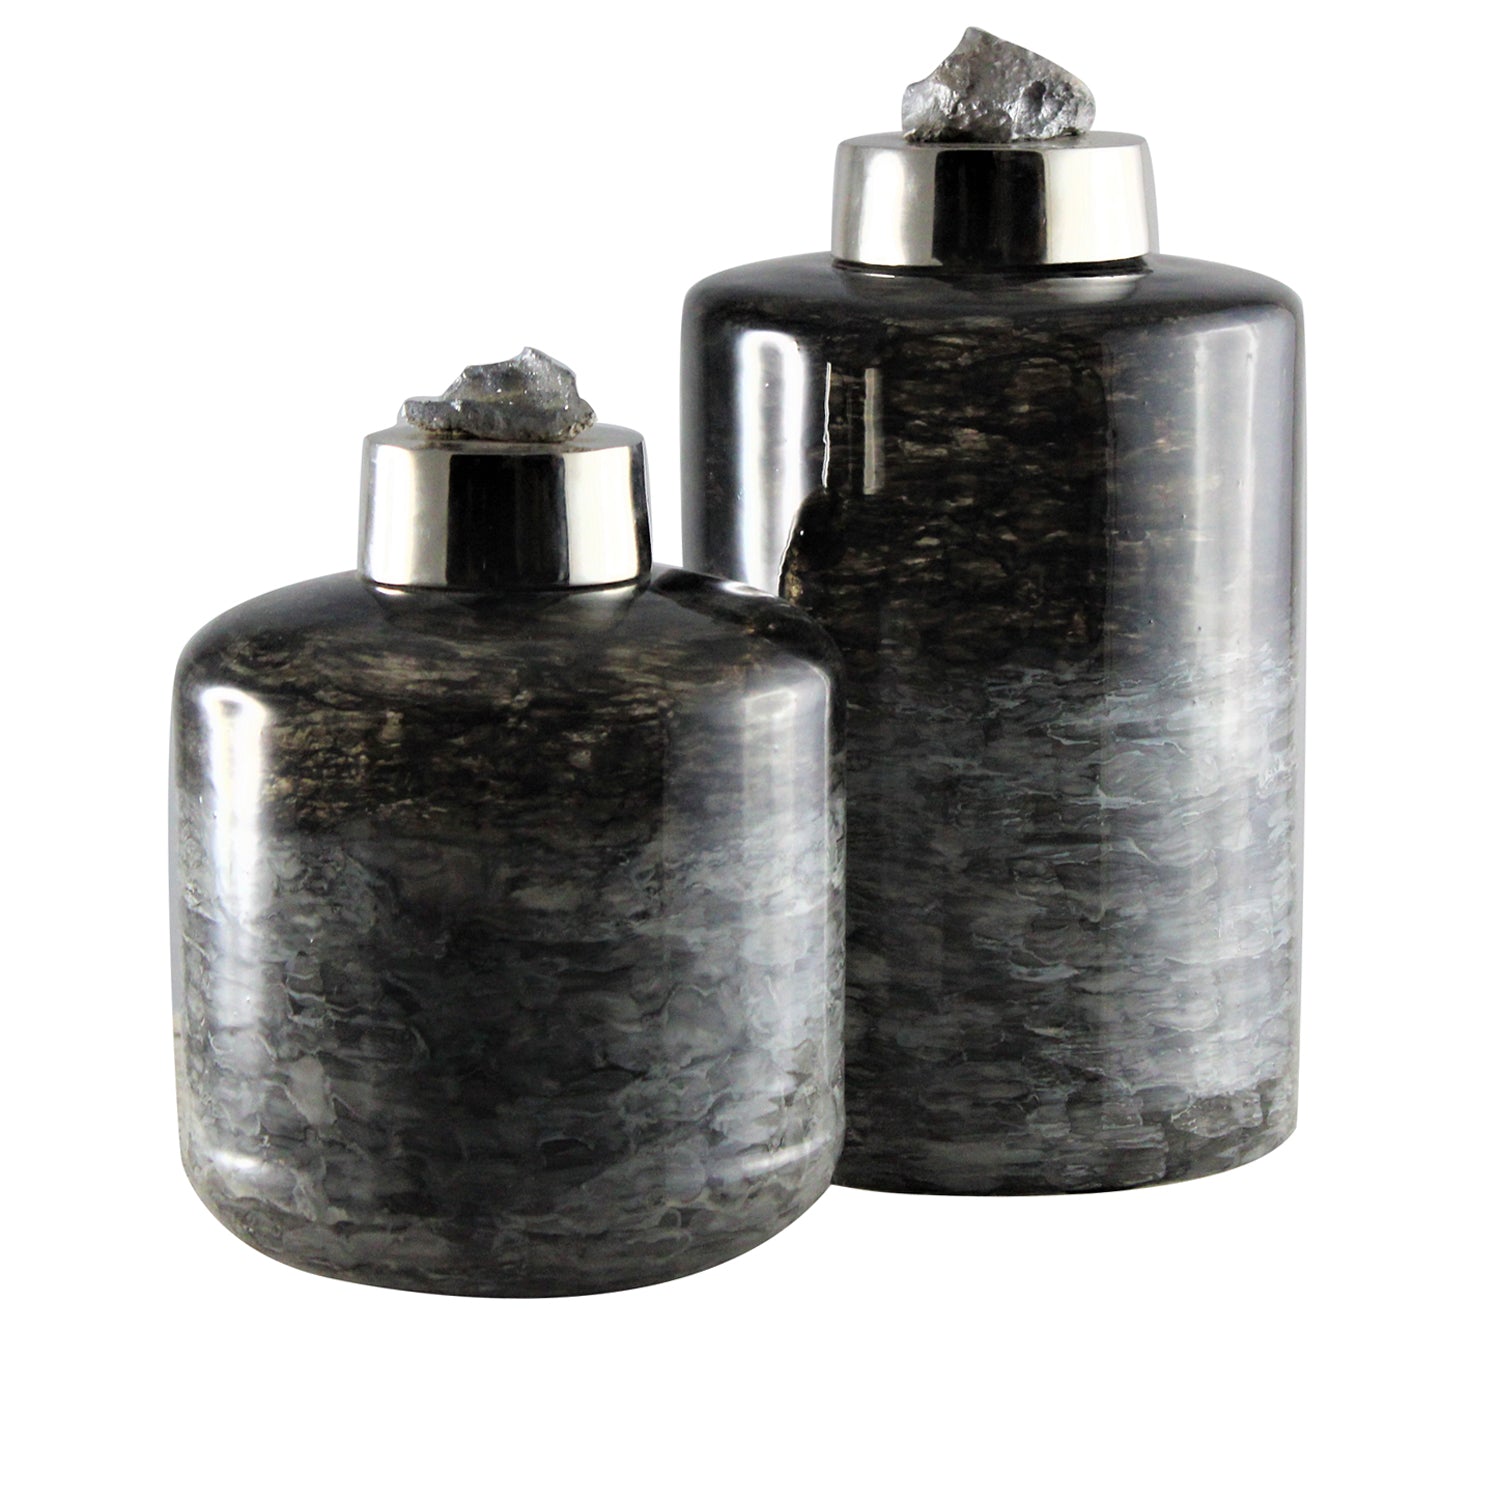 Crestview Collection Alban 11" & 8" Transitional Glass And Aluminum And Zeolite Lidded Container In Black and Gray Glass Finish